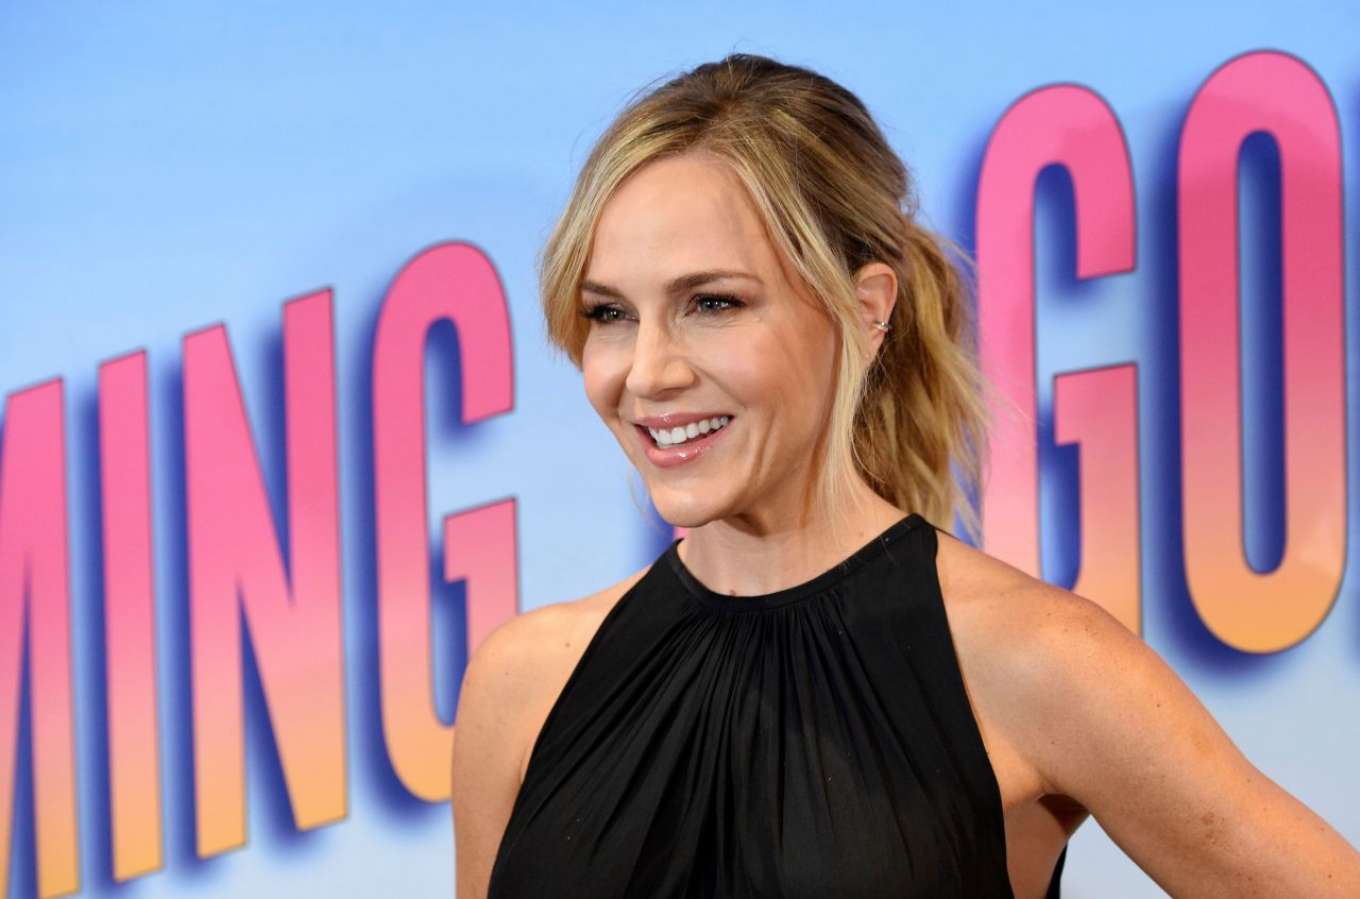 Julie Benz â€“ â€˜On Becoming a G** in Central Floridaâ€™ TV Show Premiere photocall in LA